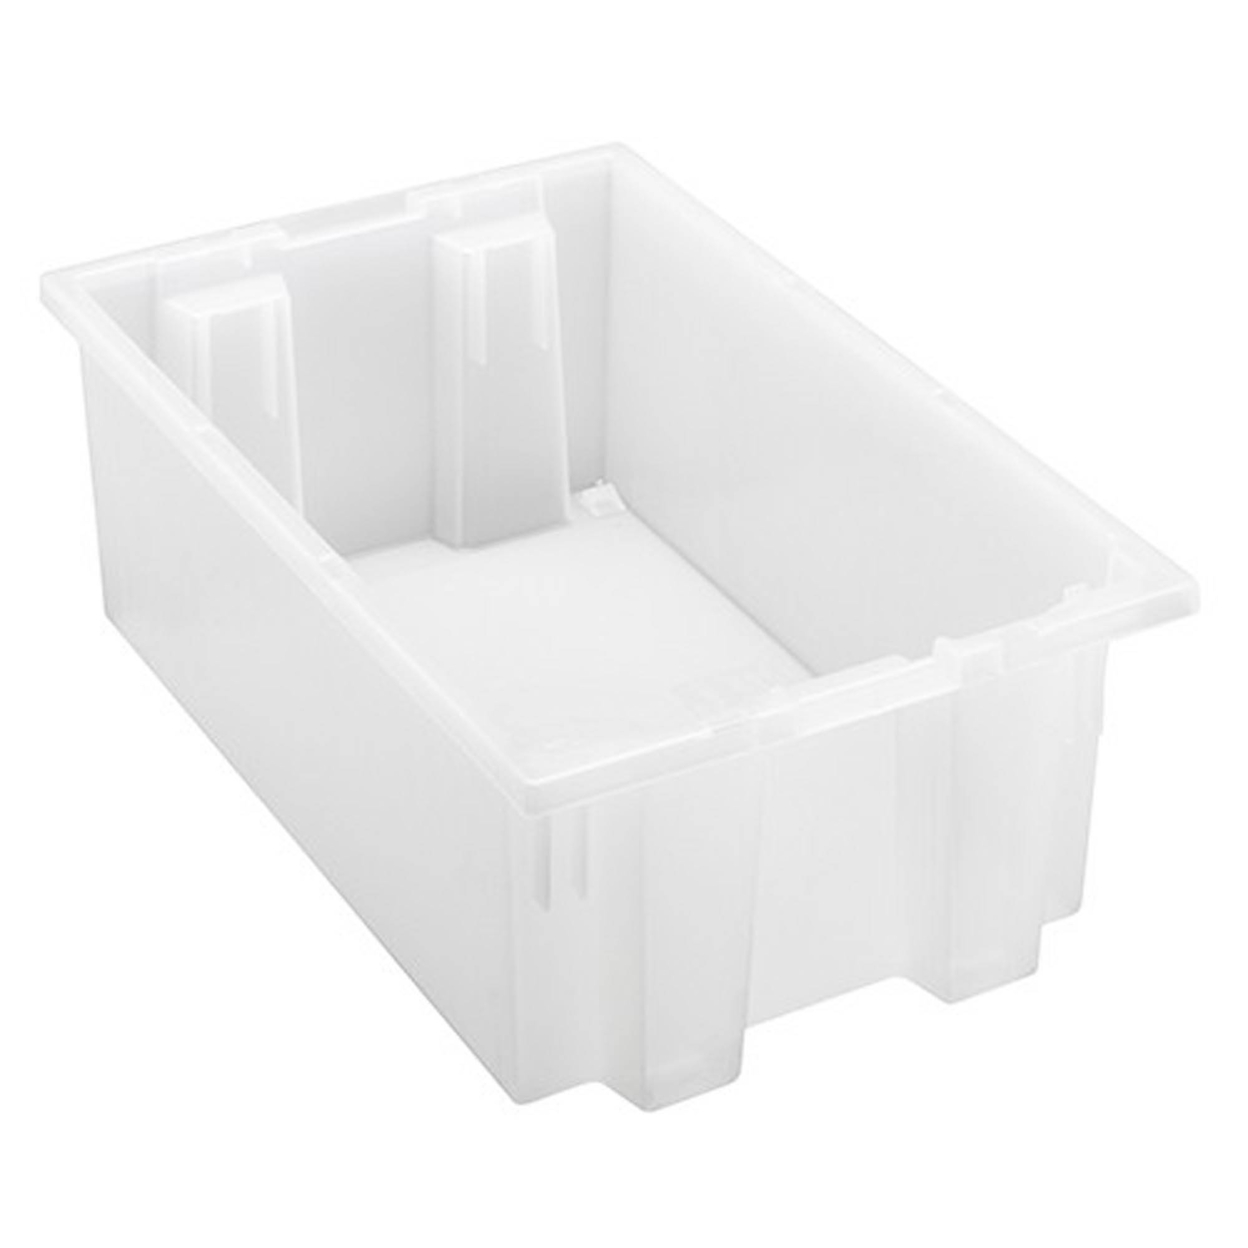 Quantum Storage Systems Stack and Nest Tote Heavy Duty Polypropylene Container, 18"W x 11"D x 6"H, 0.5 Cap (cu ft.) - - image 1 of 2